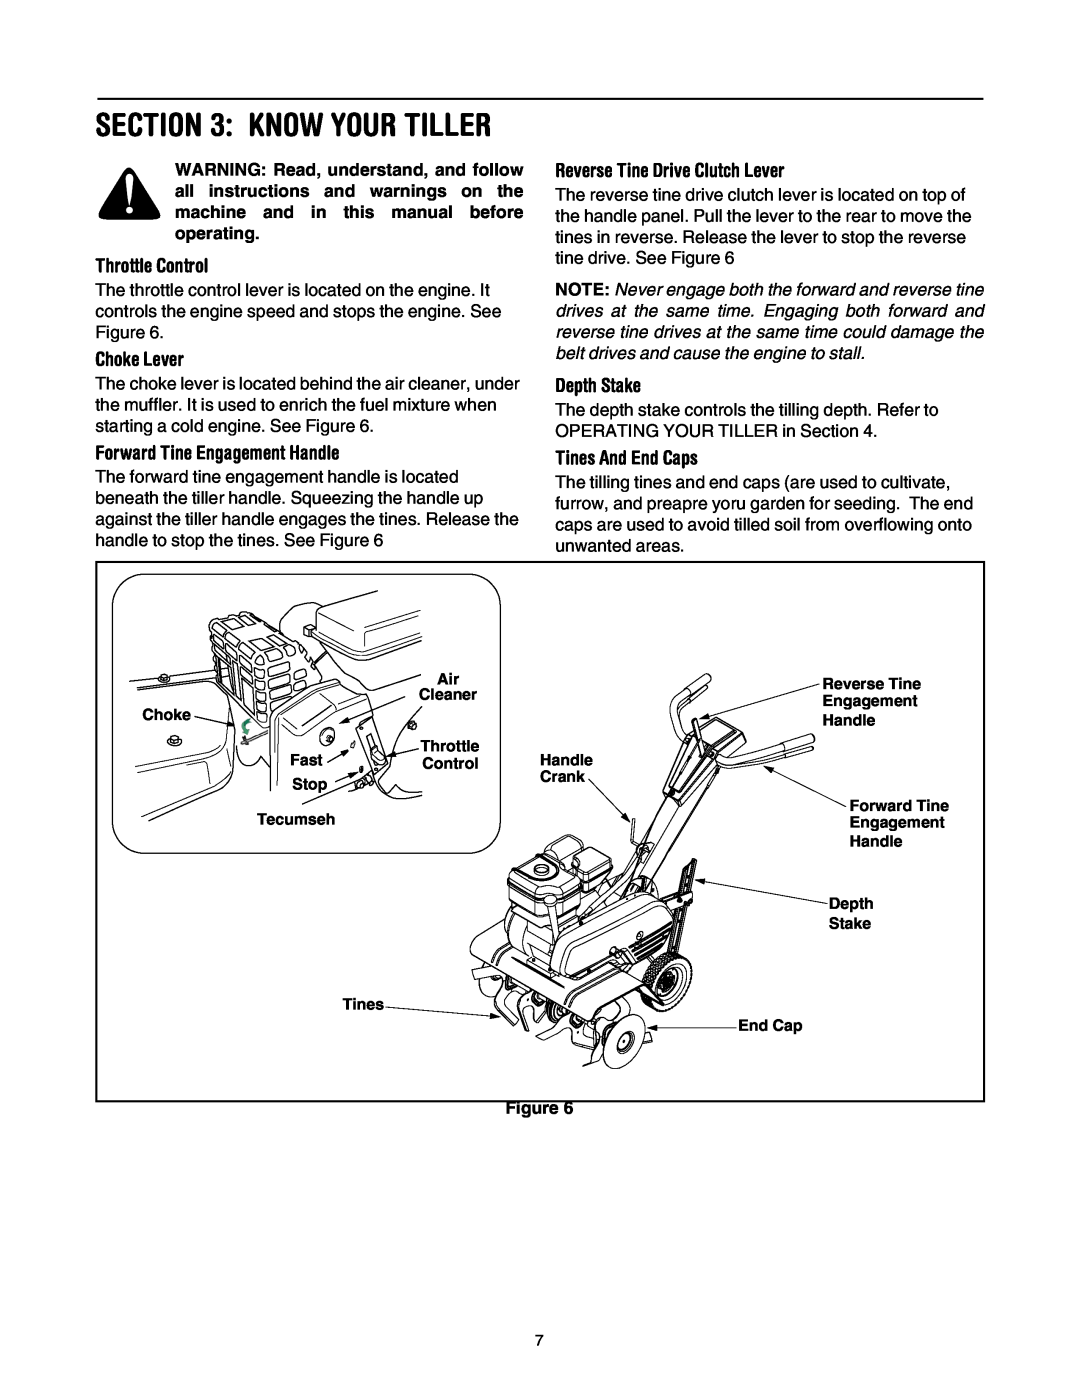 MTD 393 Know Your Tiller, Throttle Control, Choke Lever, Reverse Tine Drive Clutch Lever, Depth Stake, Tines And End Caps 